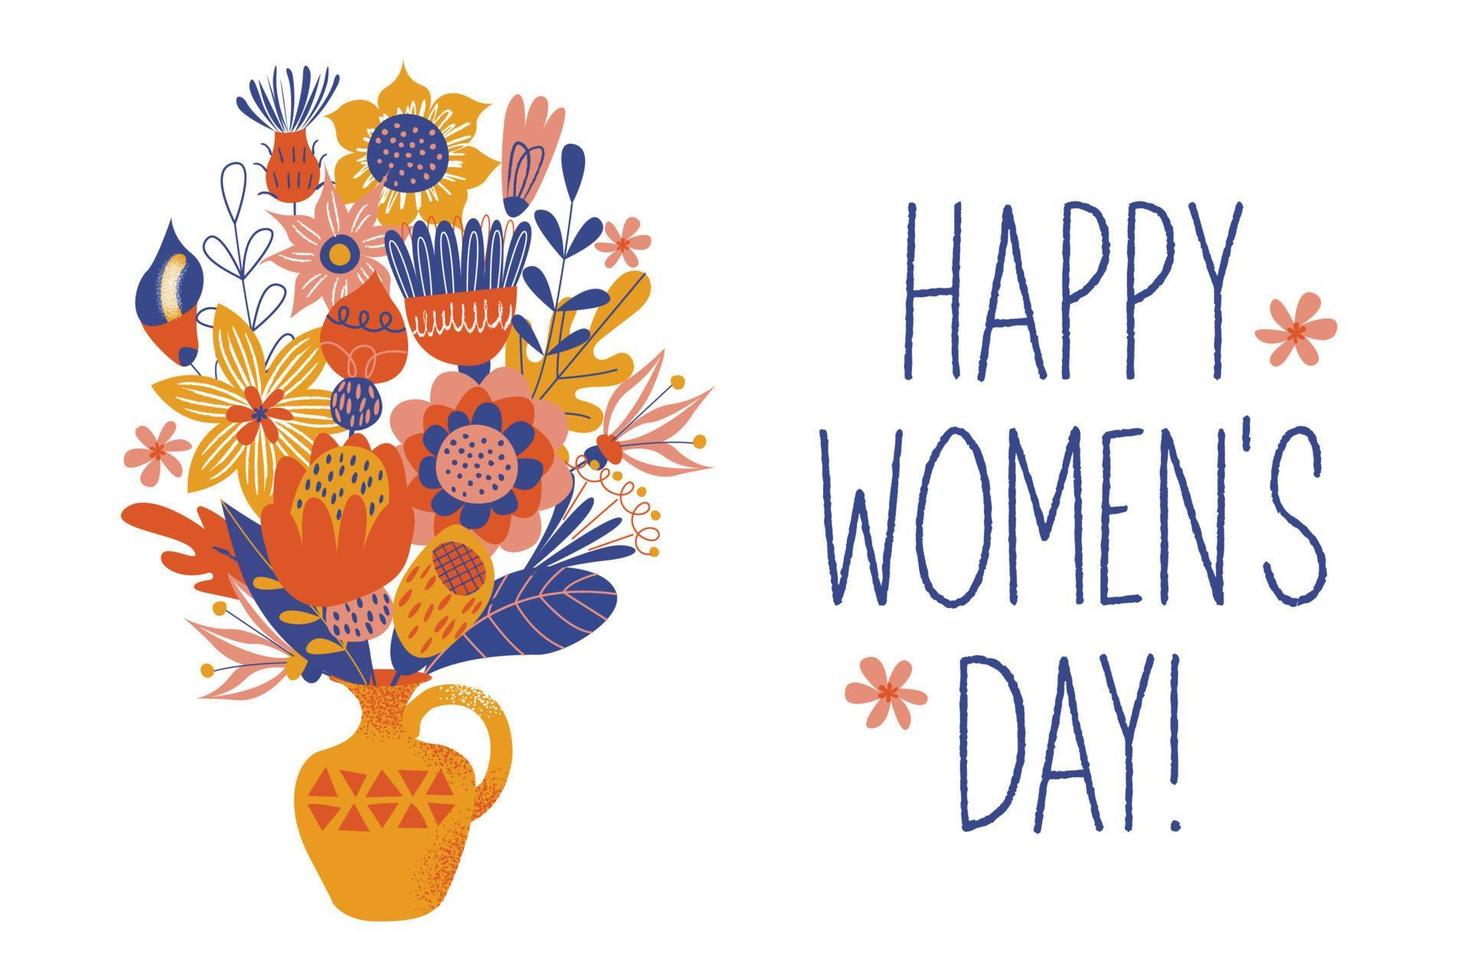 Greeting card, banner for the international women's day on March 8. Vector illustration on a white background.